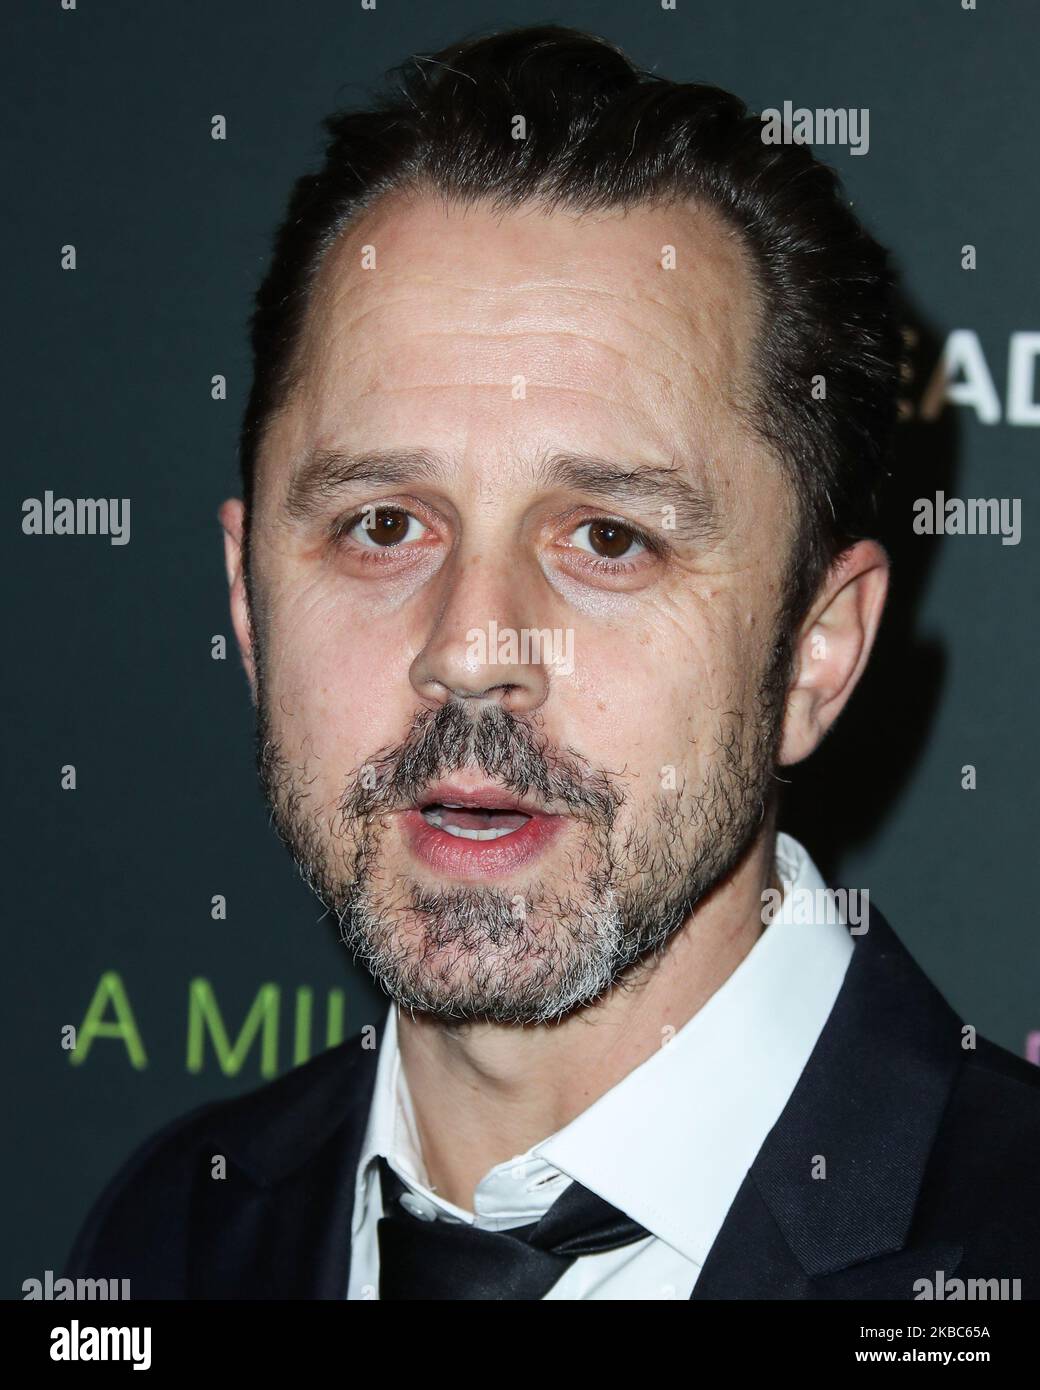 WEST HOLLYWOOD, LOS ANGELES, CALIFORNIA, USA - DECEMBER 04: Actor Giovanni Ribisi arrives at the Los Angeles Special Screening Of Momentum Pictures' 'A Million Little Pieces' held at The London Hotel West Hollywood at Beverly Hills on December 4, 2019 in West Hollywood, Los Angeles, California, United States. (Photo by Xavier Collin/Image Press Agency/NurPhoto) Stock Photo